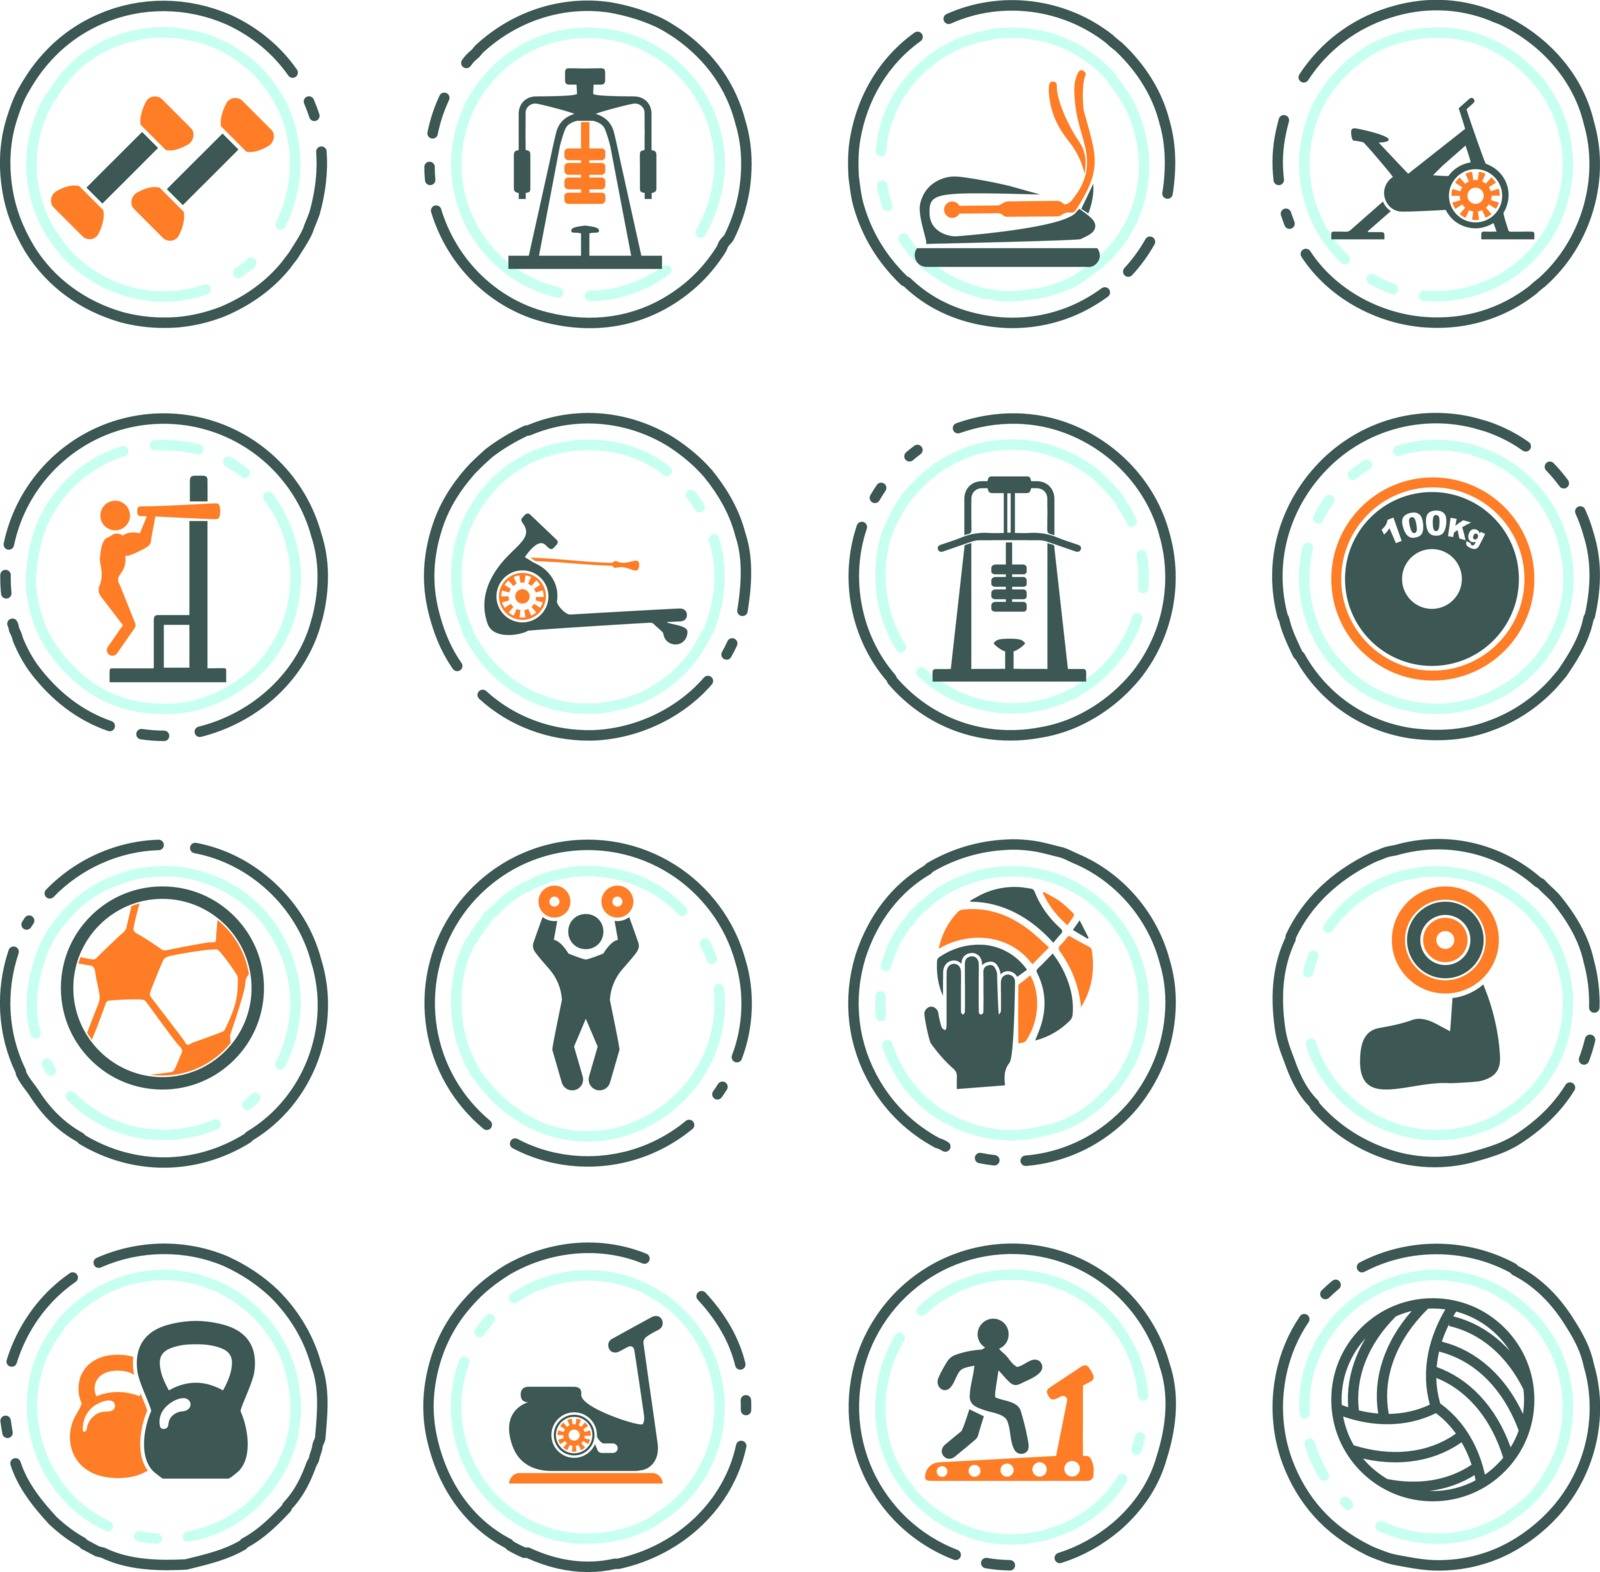 Sport equipments icons set by ayax